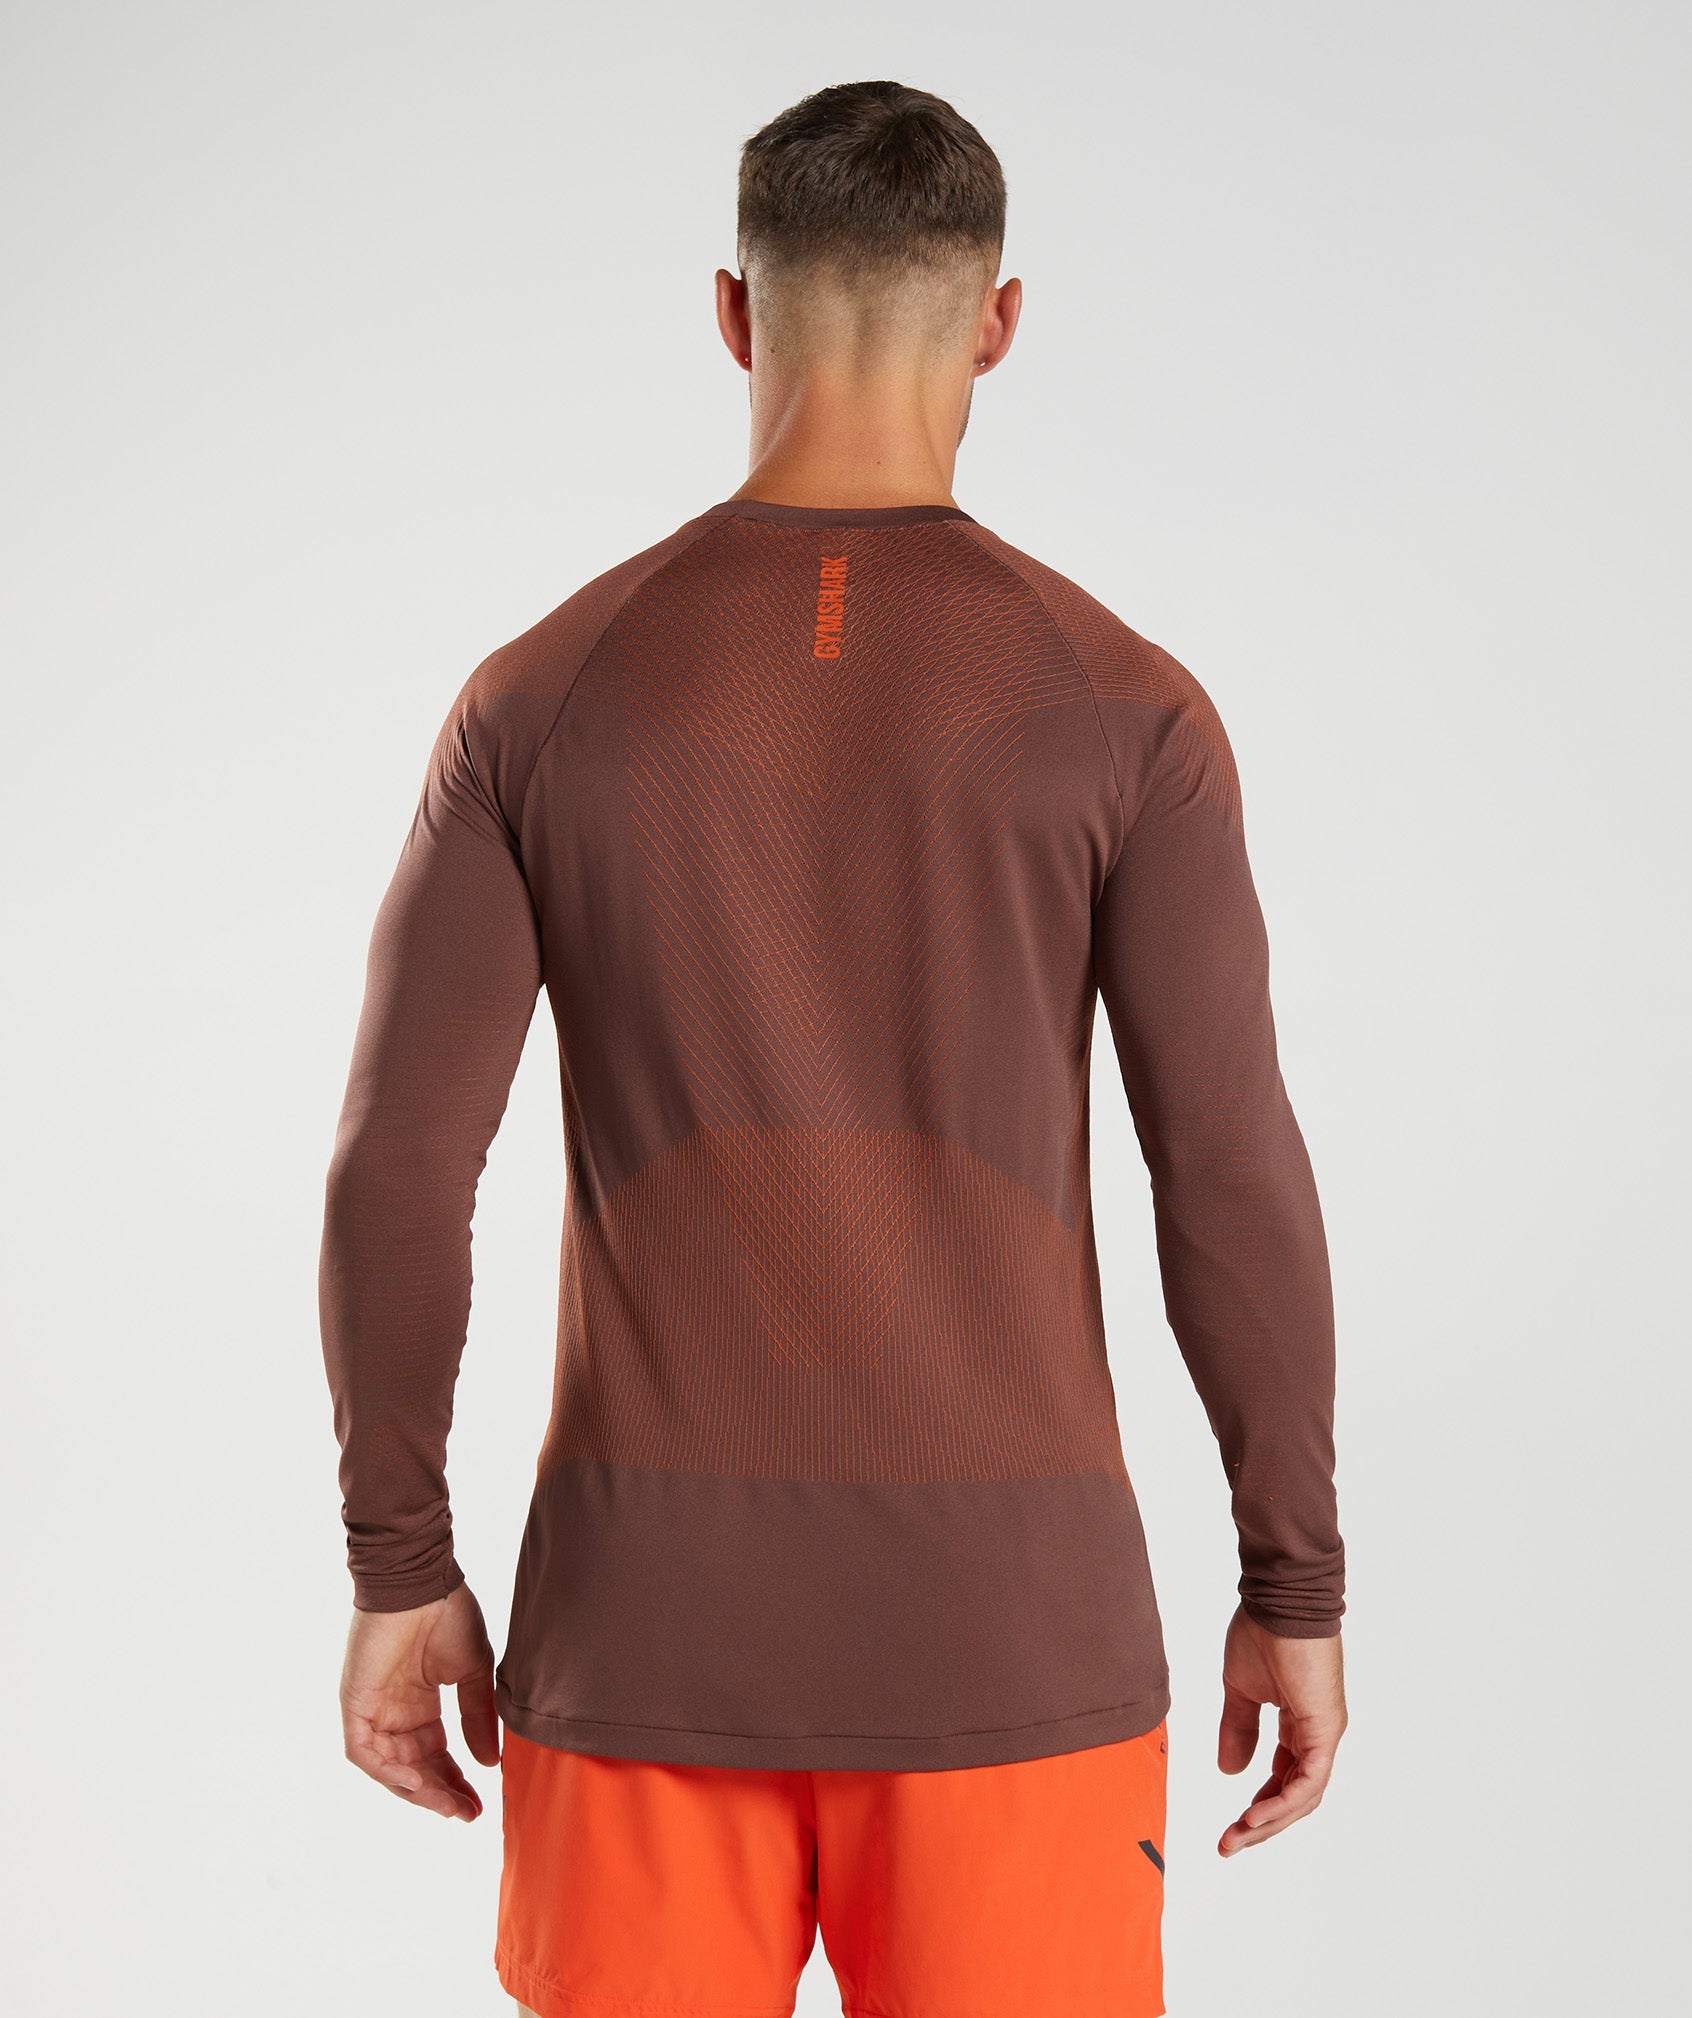 Apex Seamless Long Sleeve T-Shirt in Cherry Brown/Pepper Red - view 2